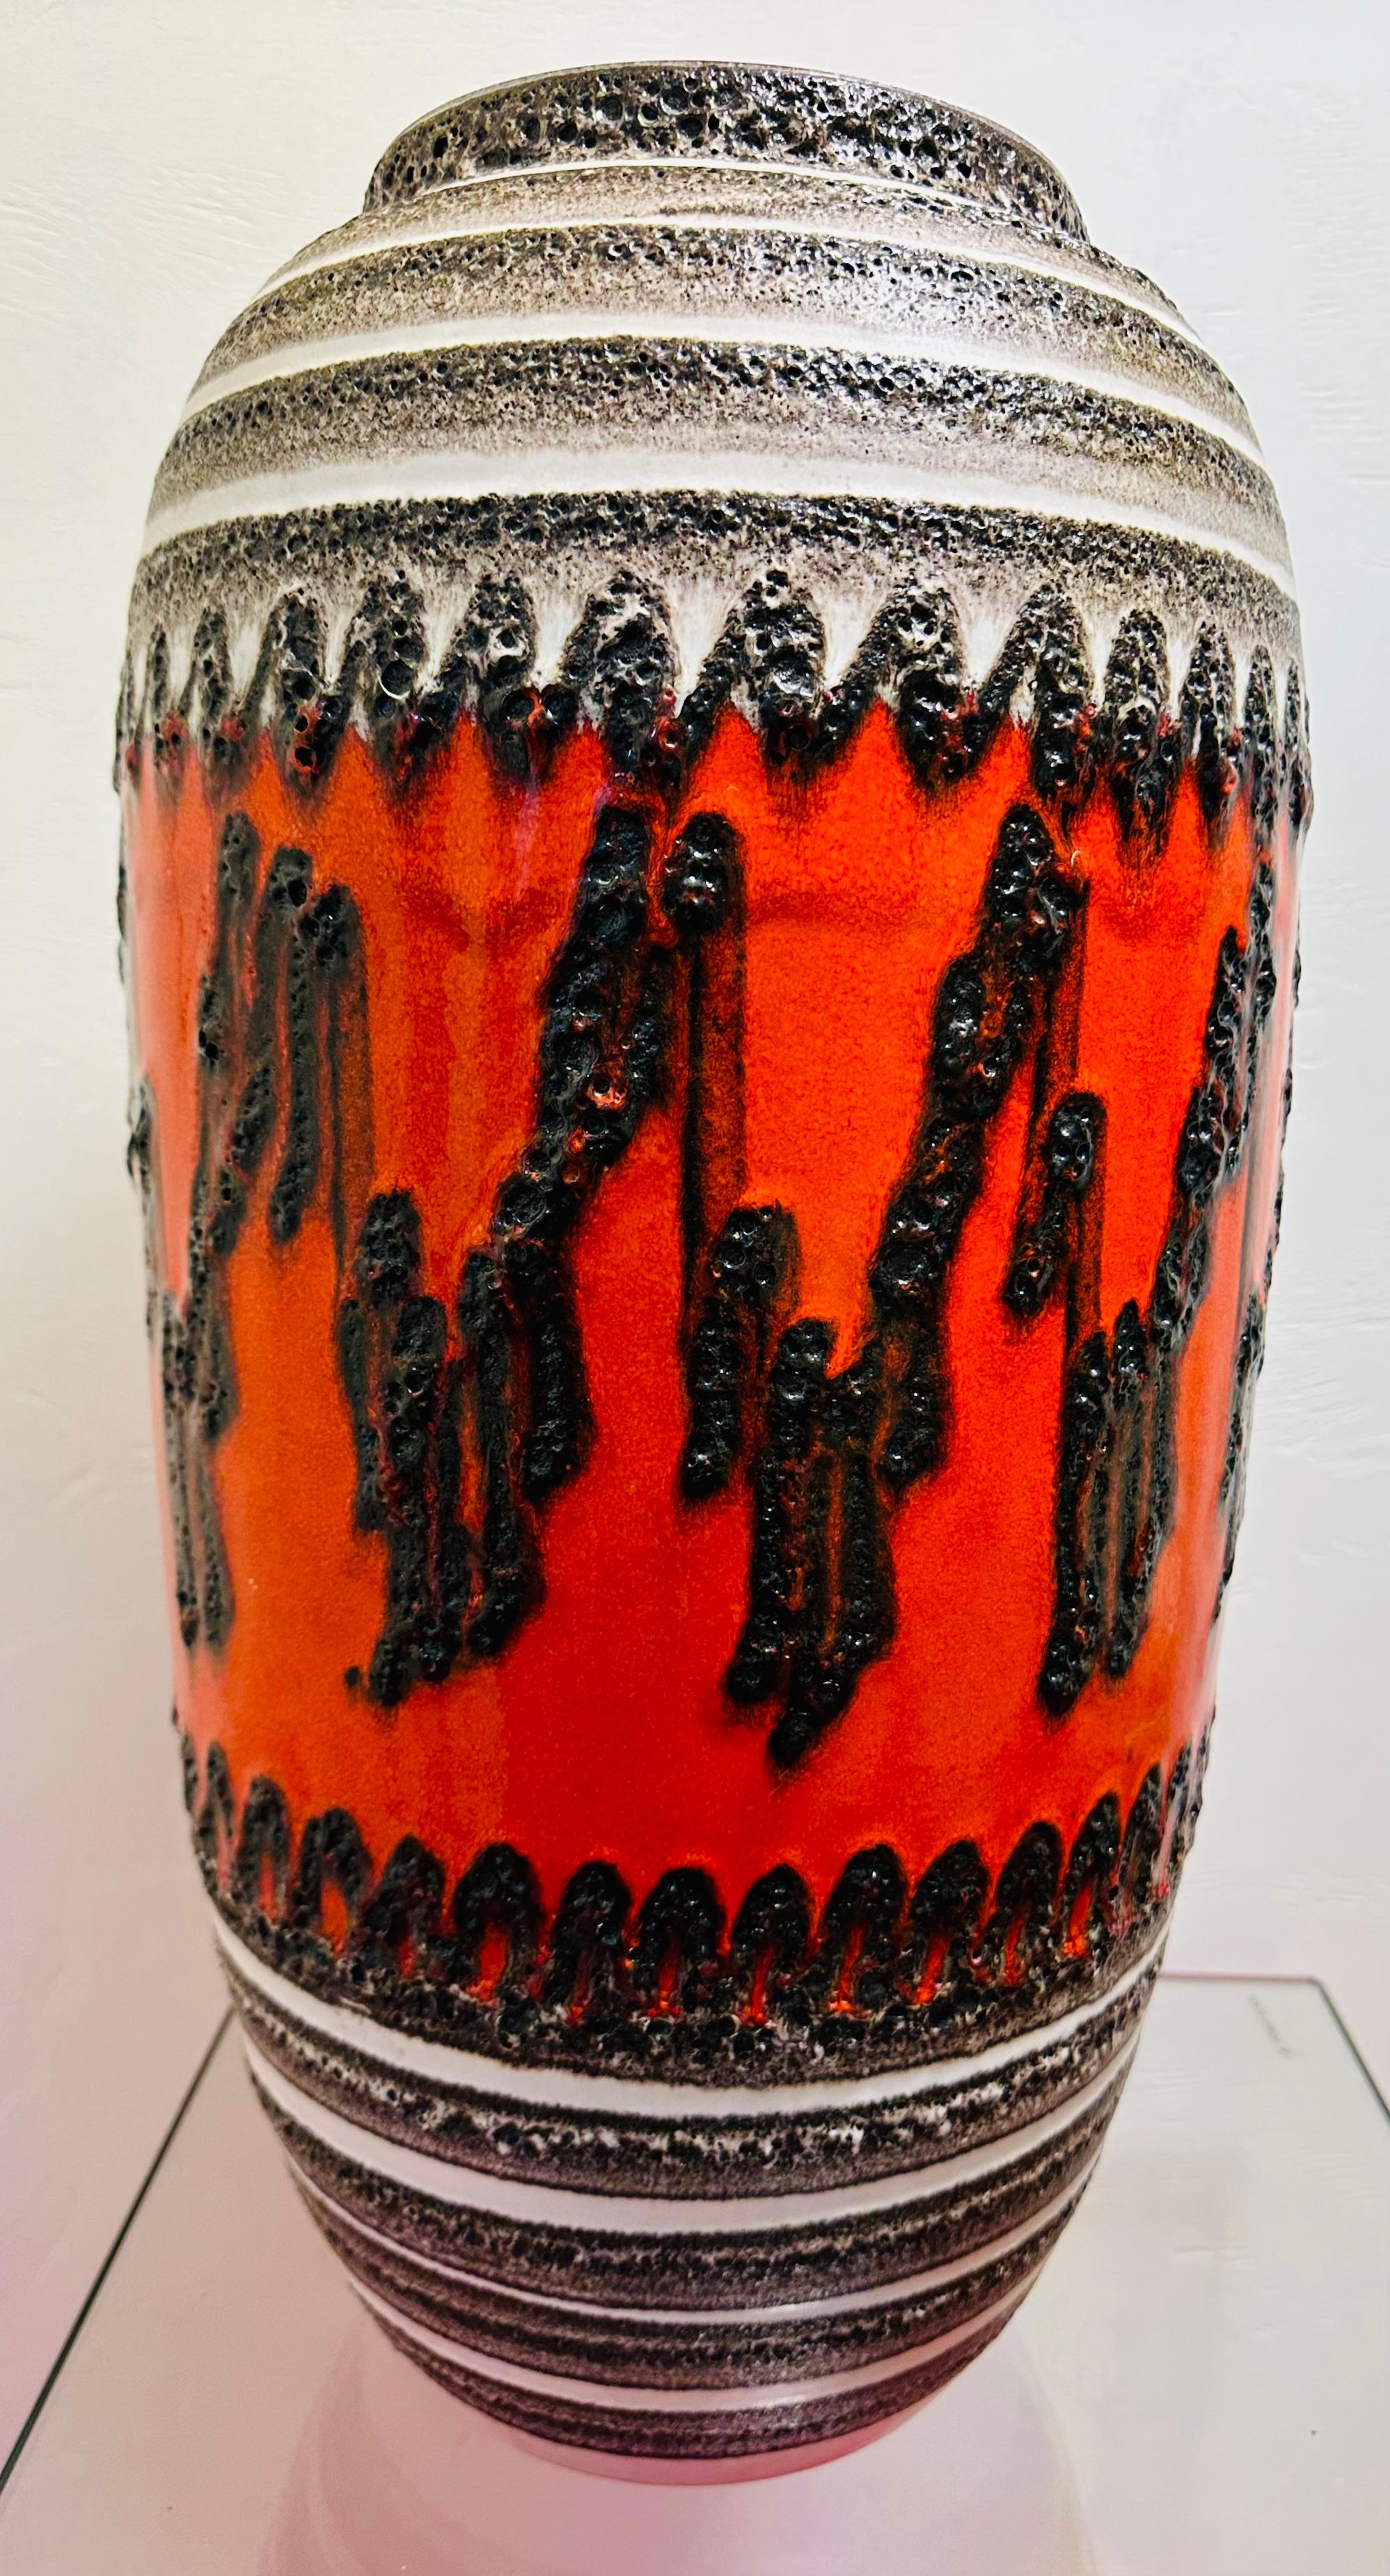 An extra large and striking fat lava floor vase dating from the 1960s/70s. Manufactured in West Germany by Scheurich. Model number inscribed on the base: 546-52 W. Germany.

A multi-coloured fat lava matt and gloss glazed floor vase in bright orange